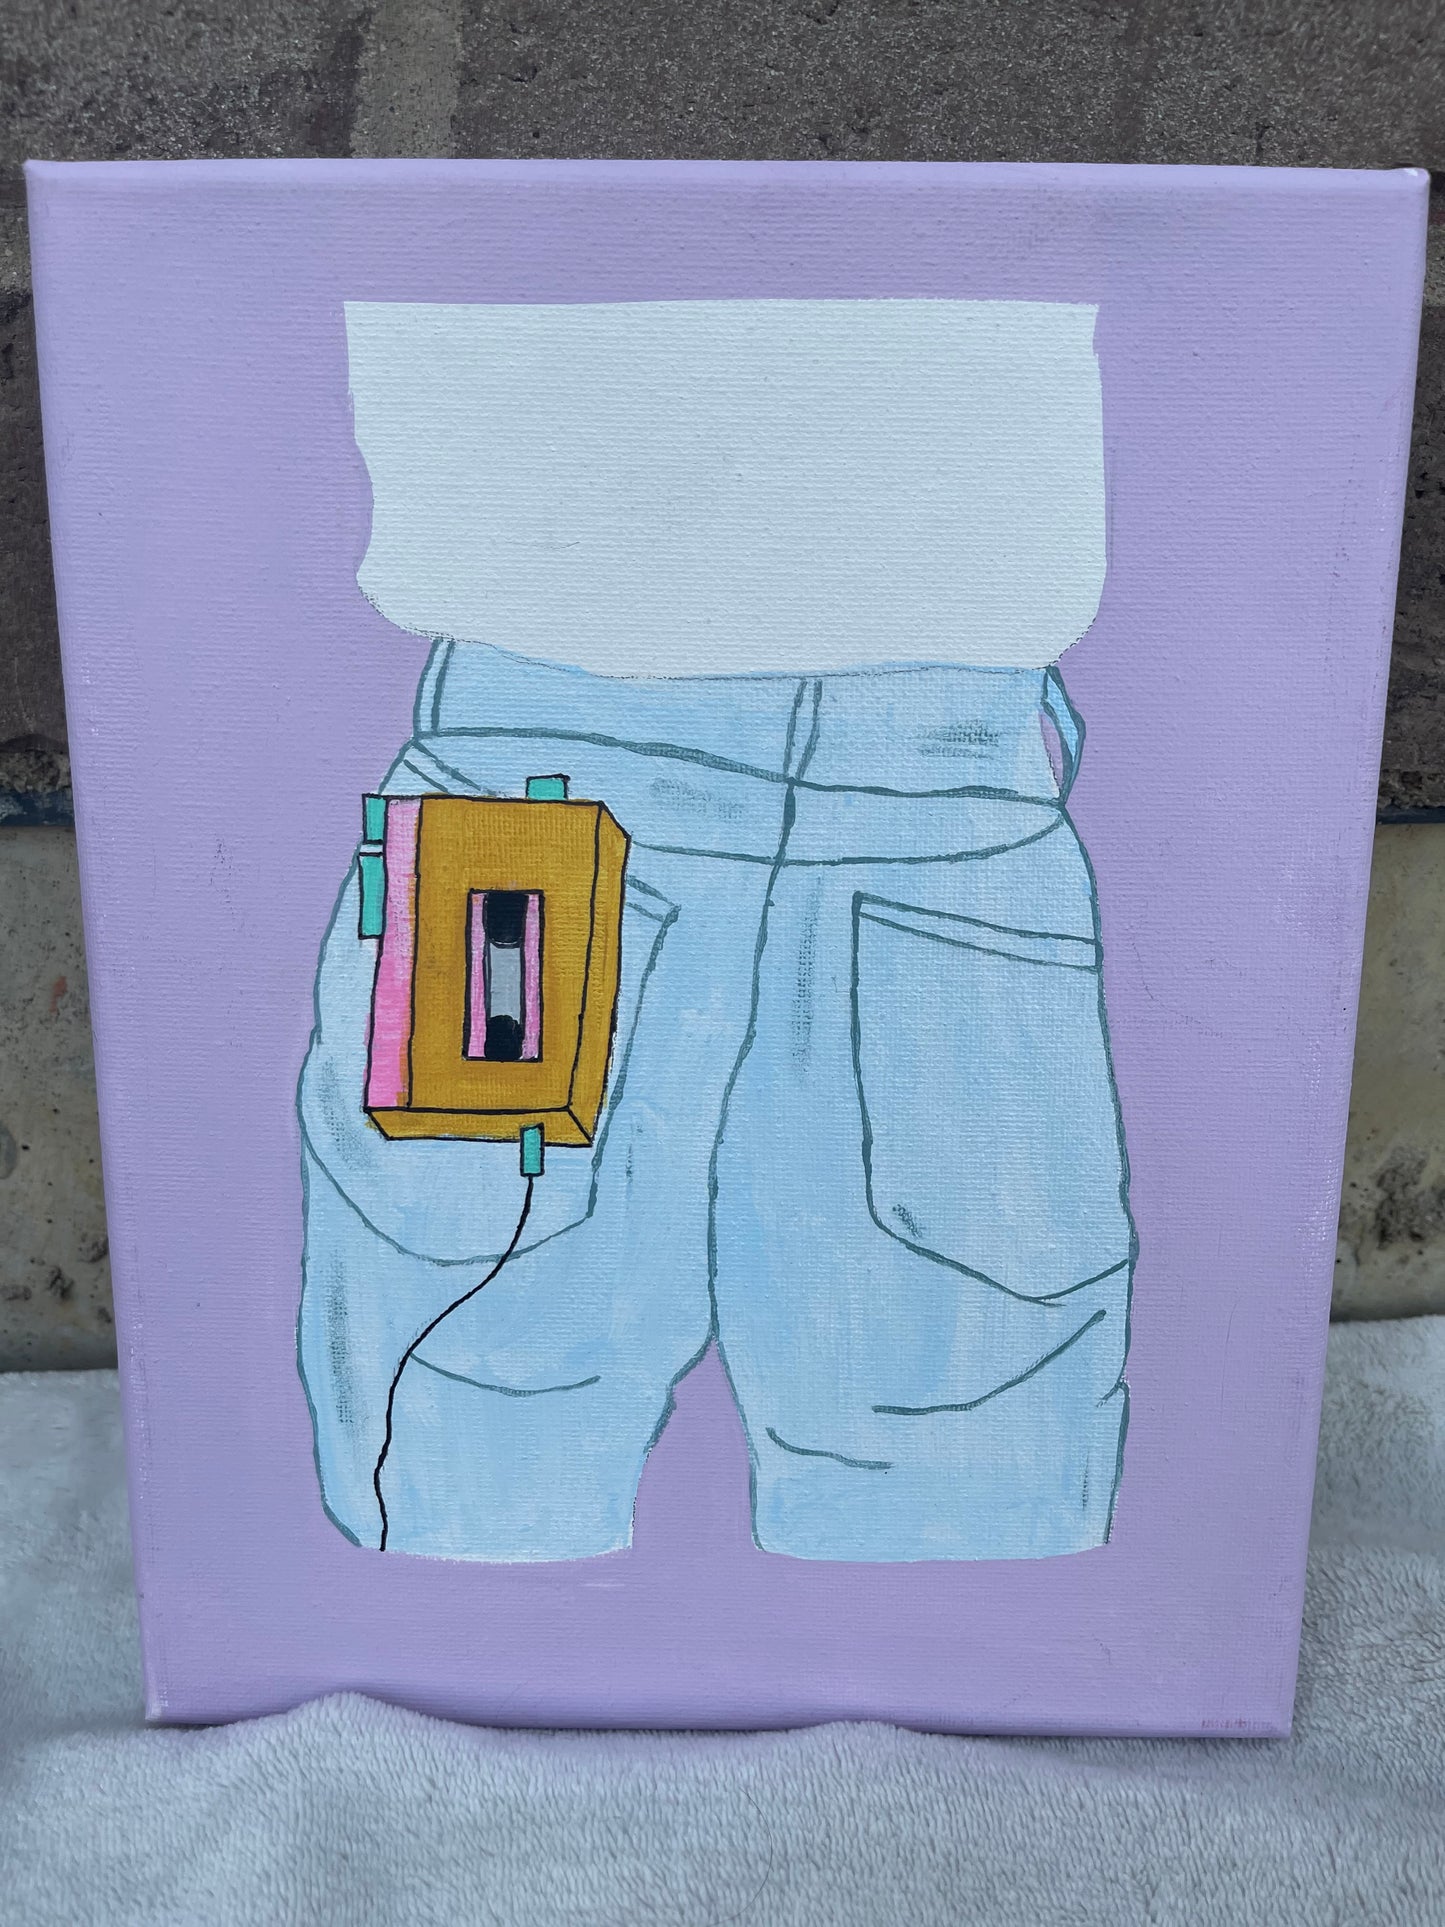 Cassette Player 90s Theme by em_gem_canvases